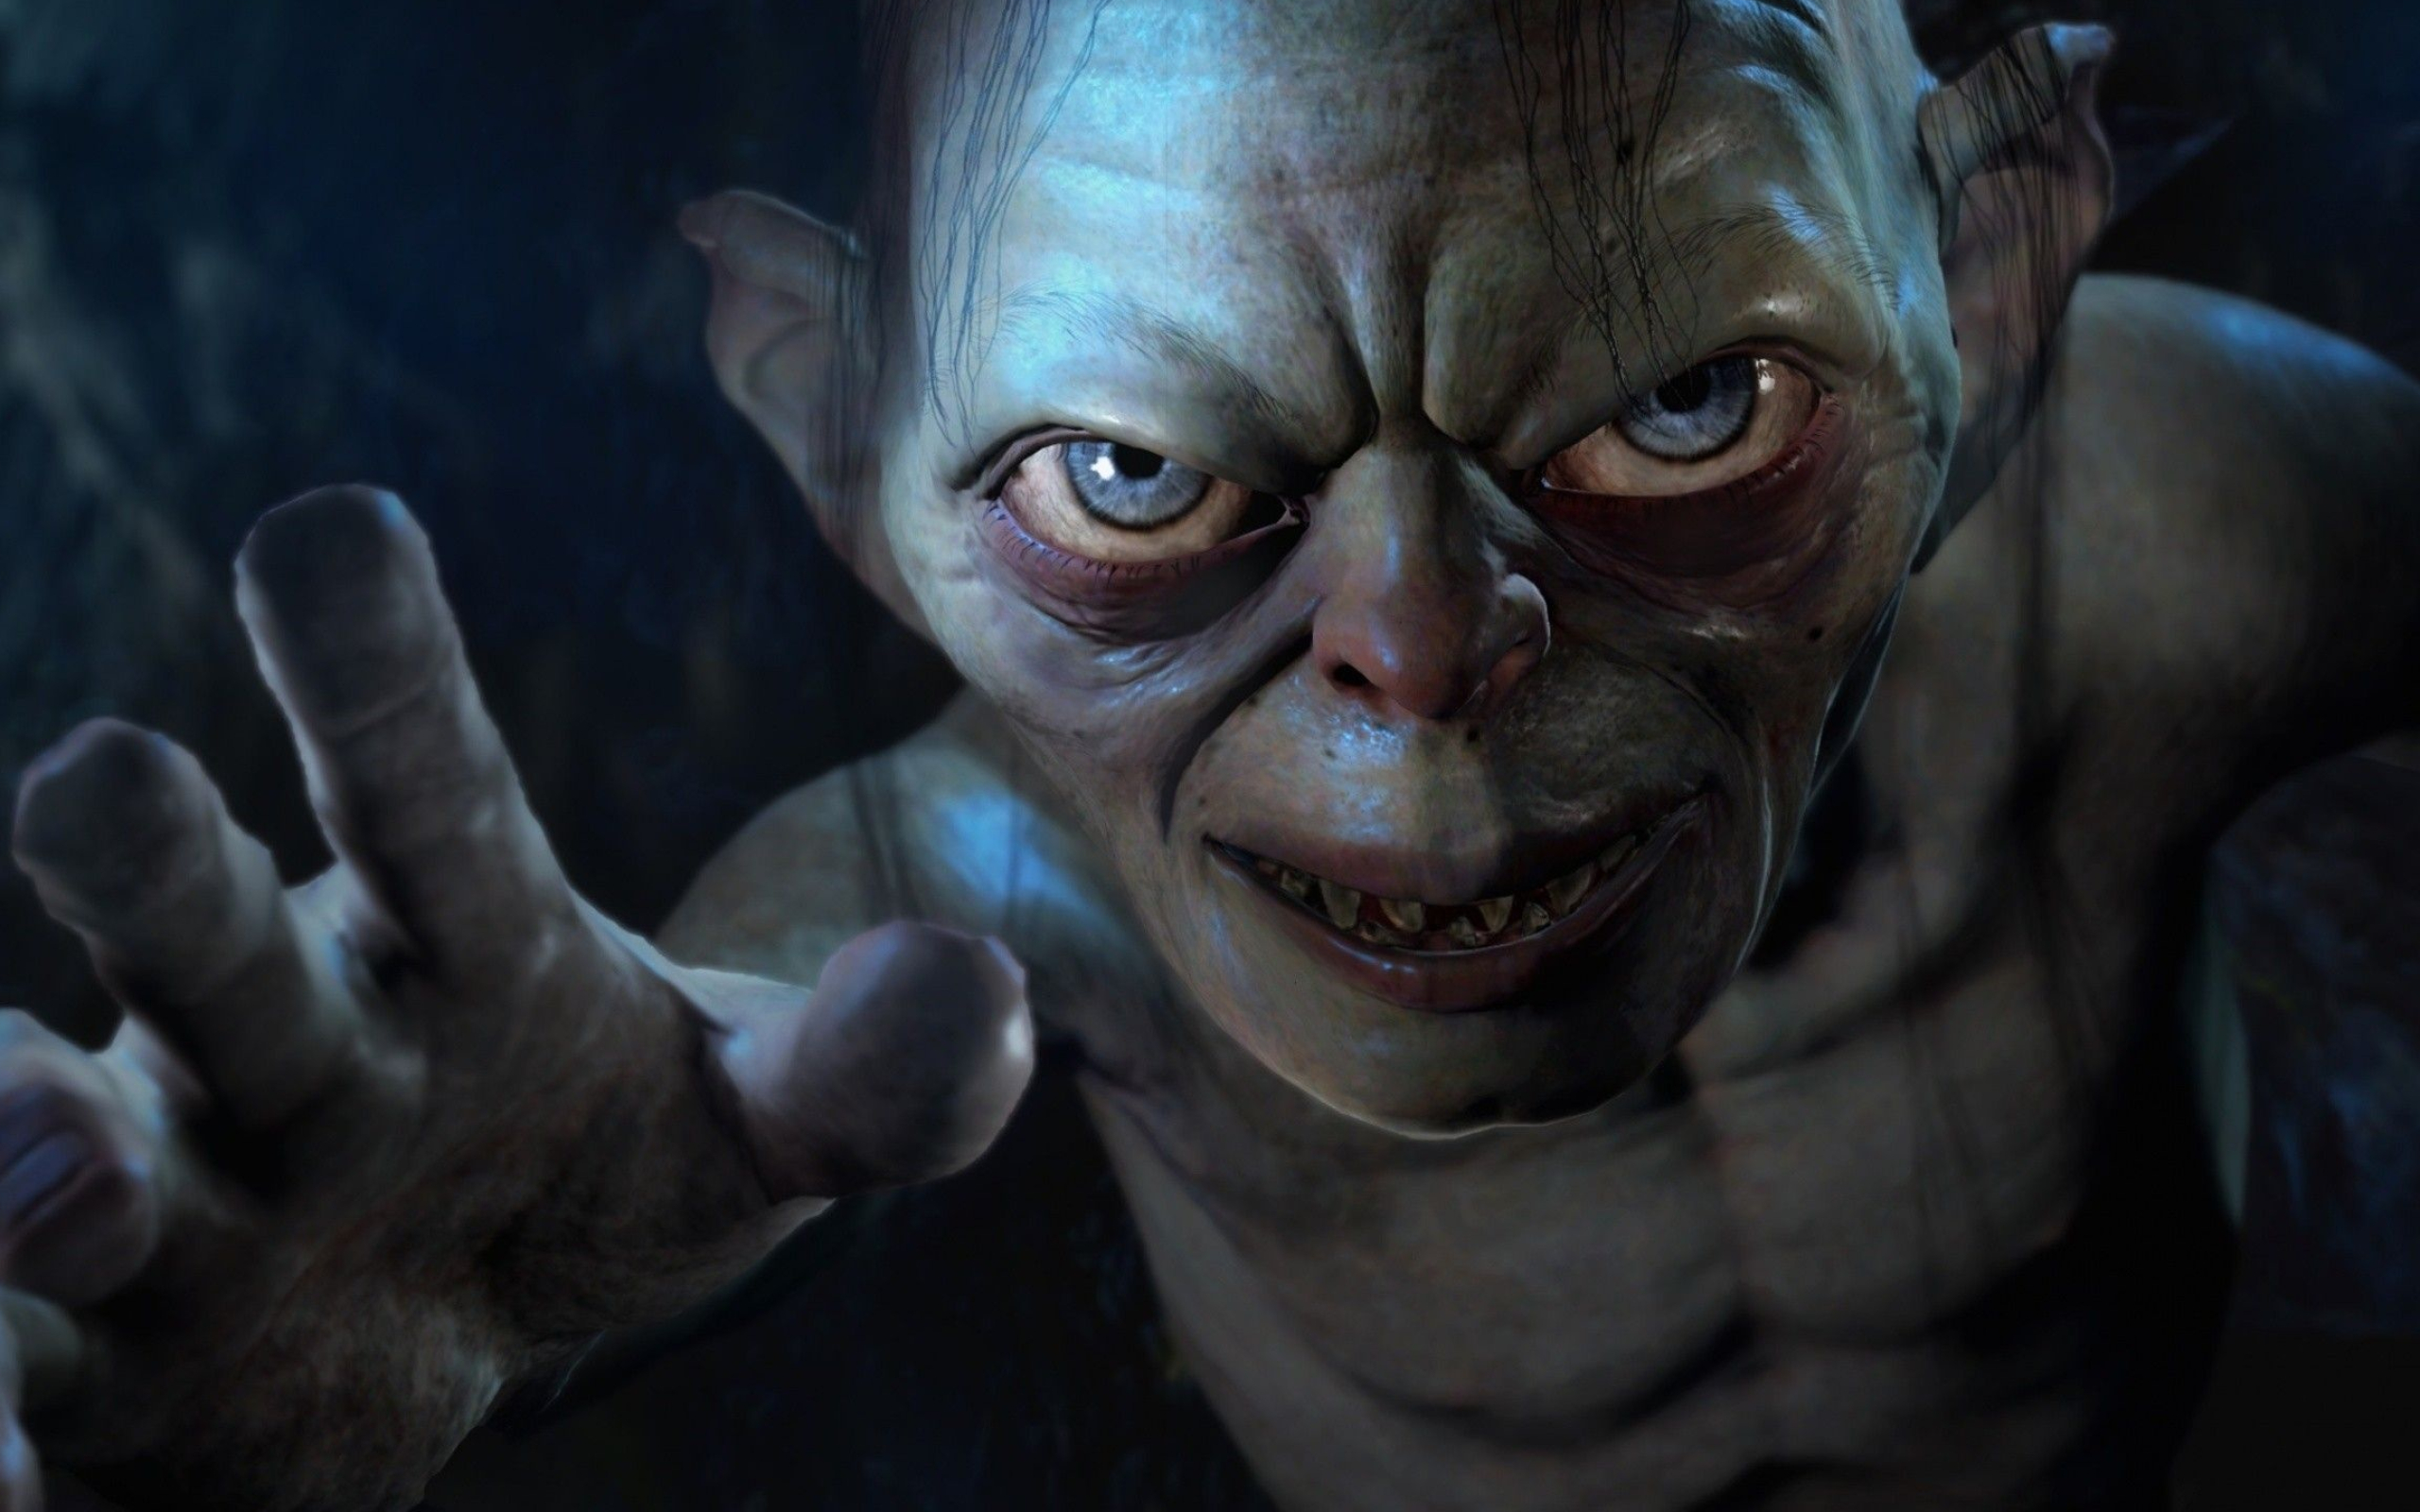 Gollum, Lord of the Rings, High-quality wallpapers, Free backgrounds, 2560x1600 HD Desktop